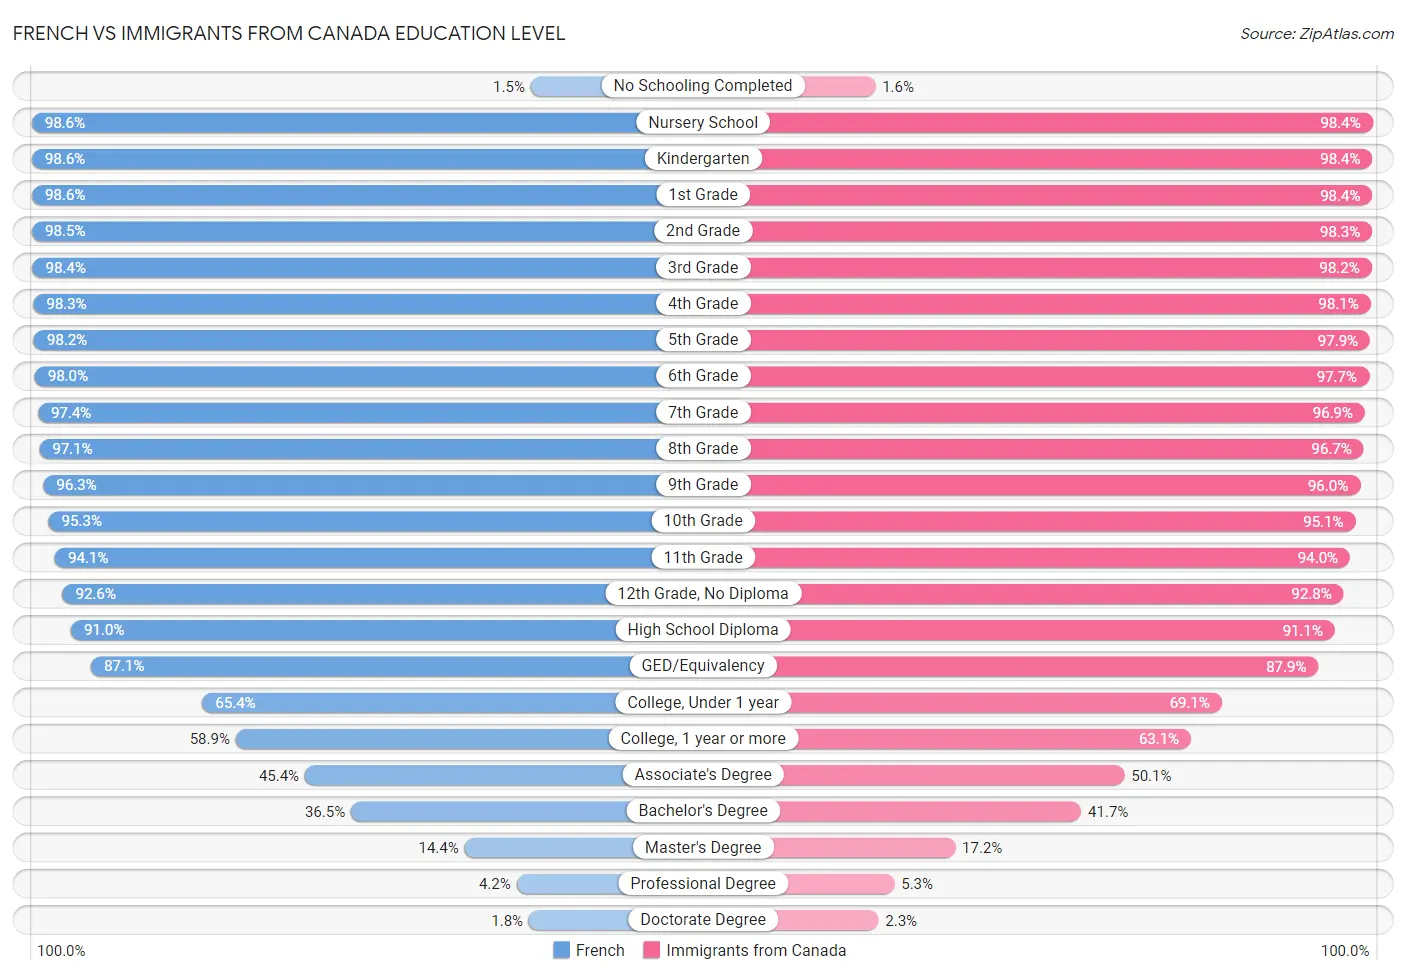 French vs Immigrants from Canada Education Level